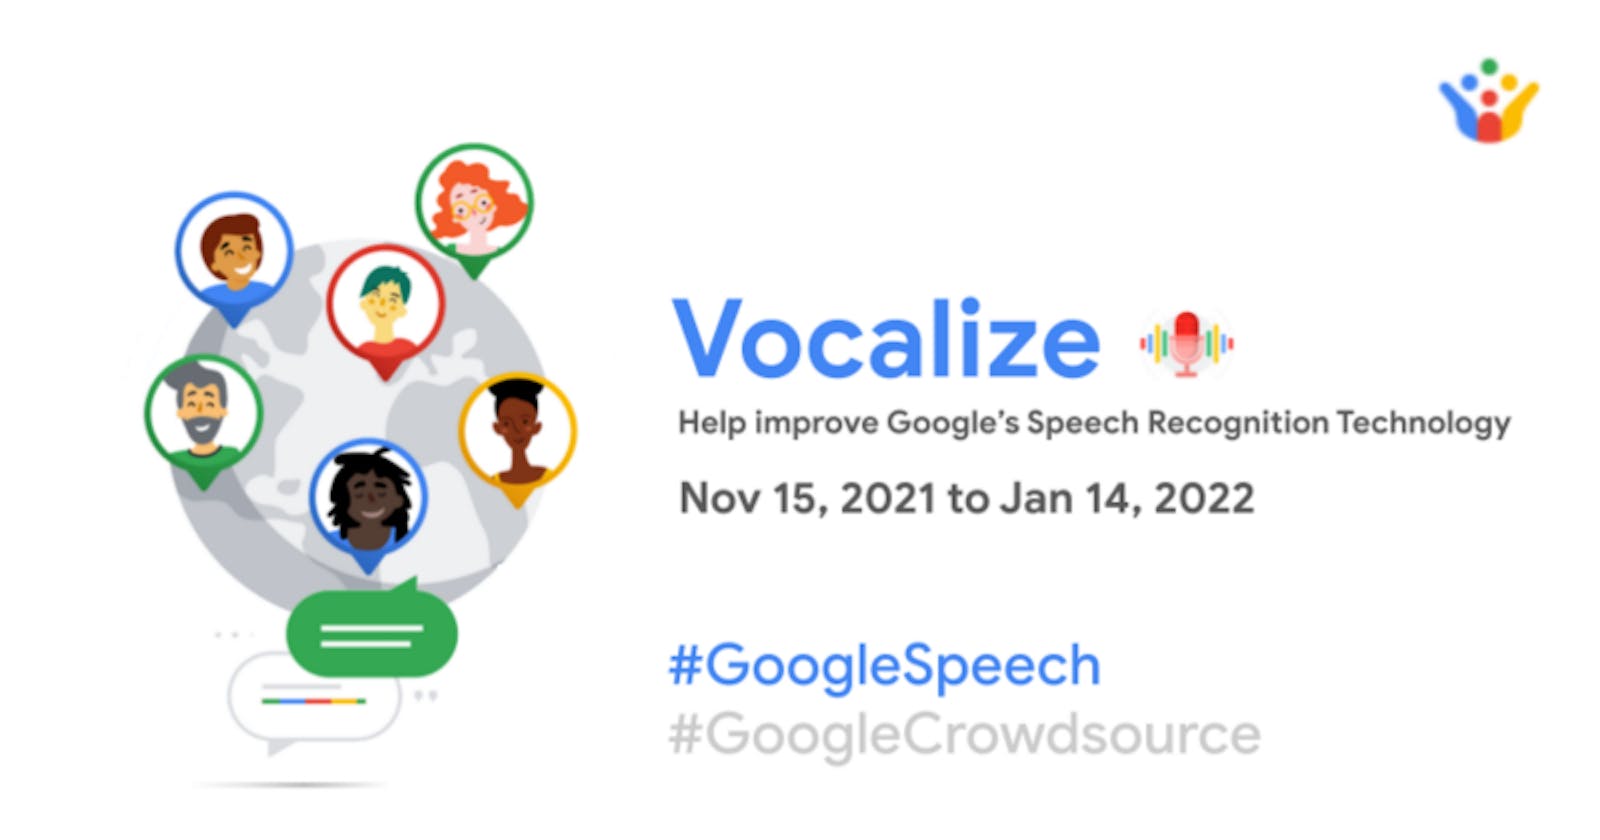 Vocalize Campaign by Google Crowdsource